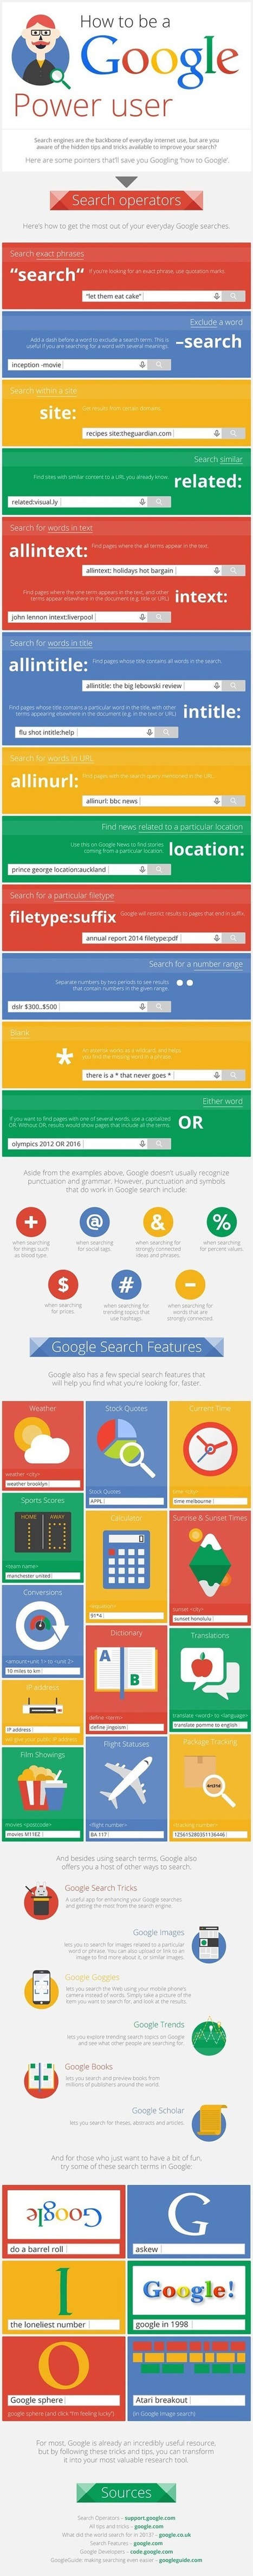 46 Hidden Tips and Tricks to Use Google Search Like a Boss: Infographic | Social Media for Higher Education | Scoop.it